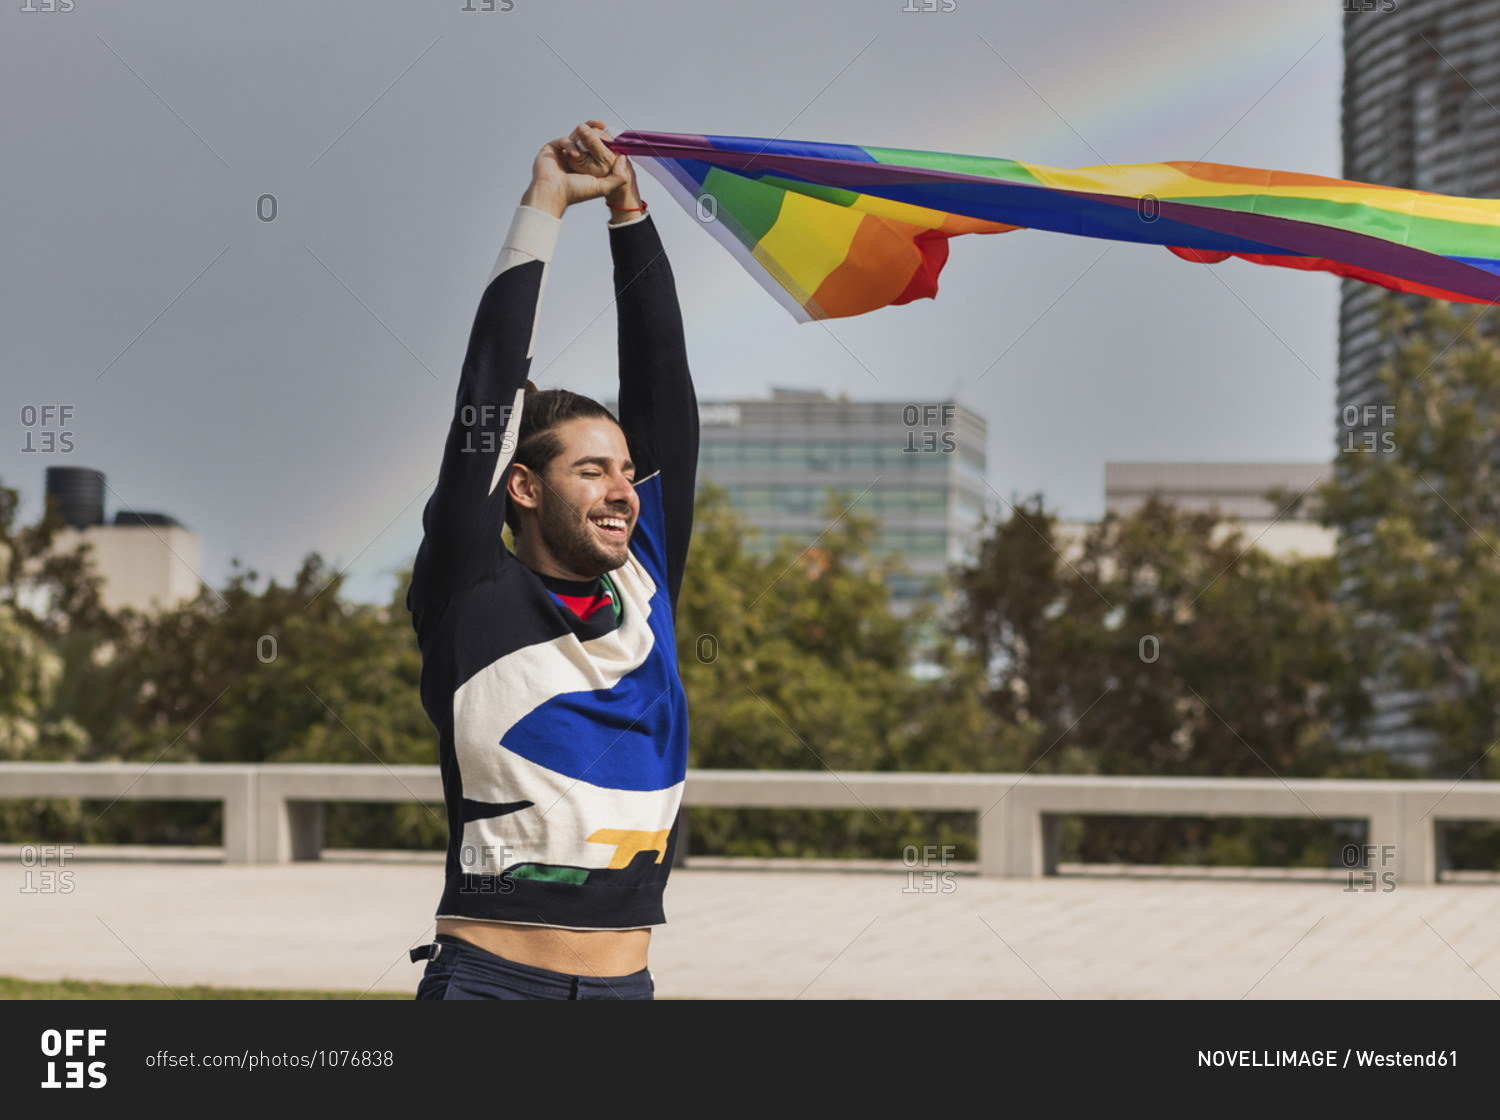 Smiling man with eyes closed holding rainbow scarf against sky